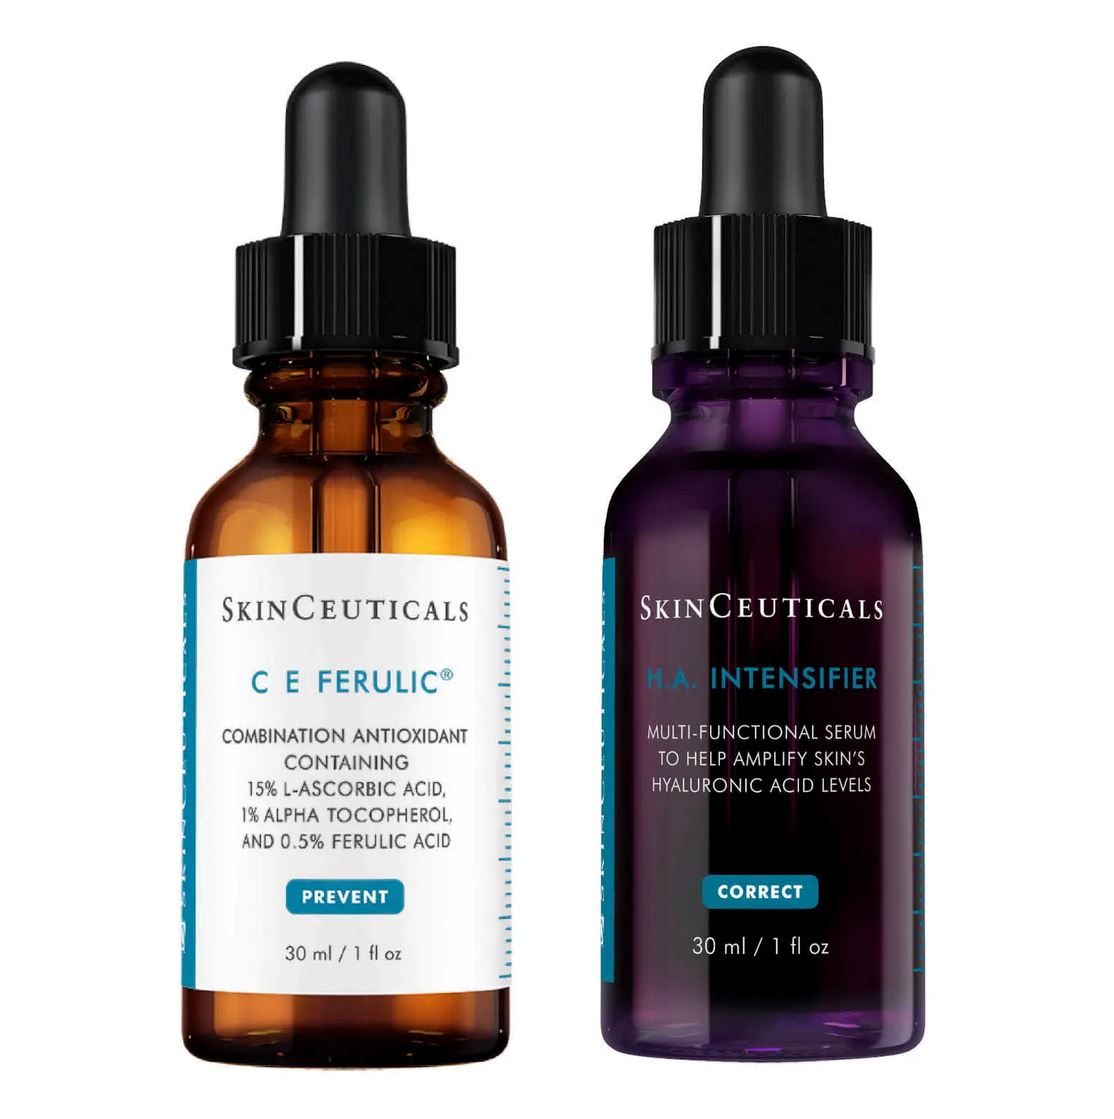 SkinCeuticals Plump and Glow Regimen ($268 Value) SkinCeuticals Shop at Exclusive Beauty Club